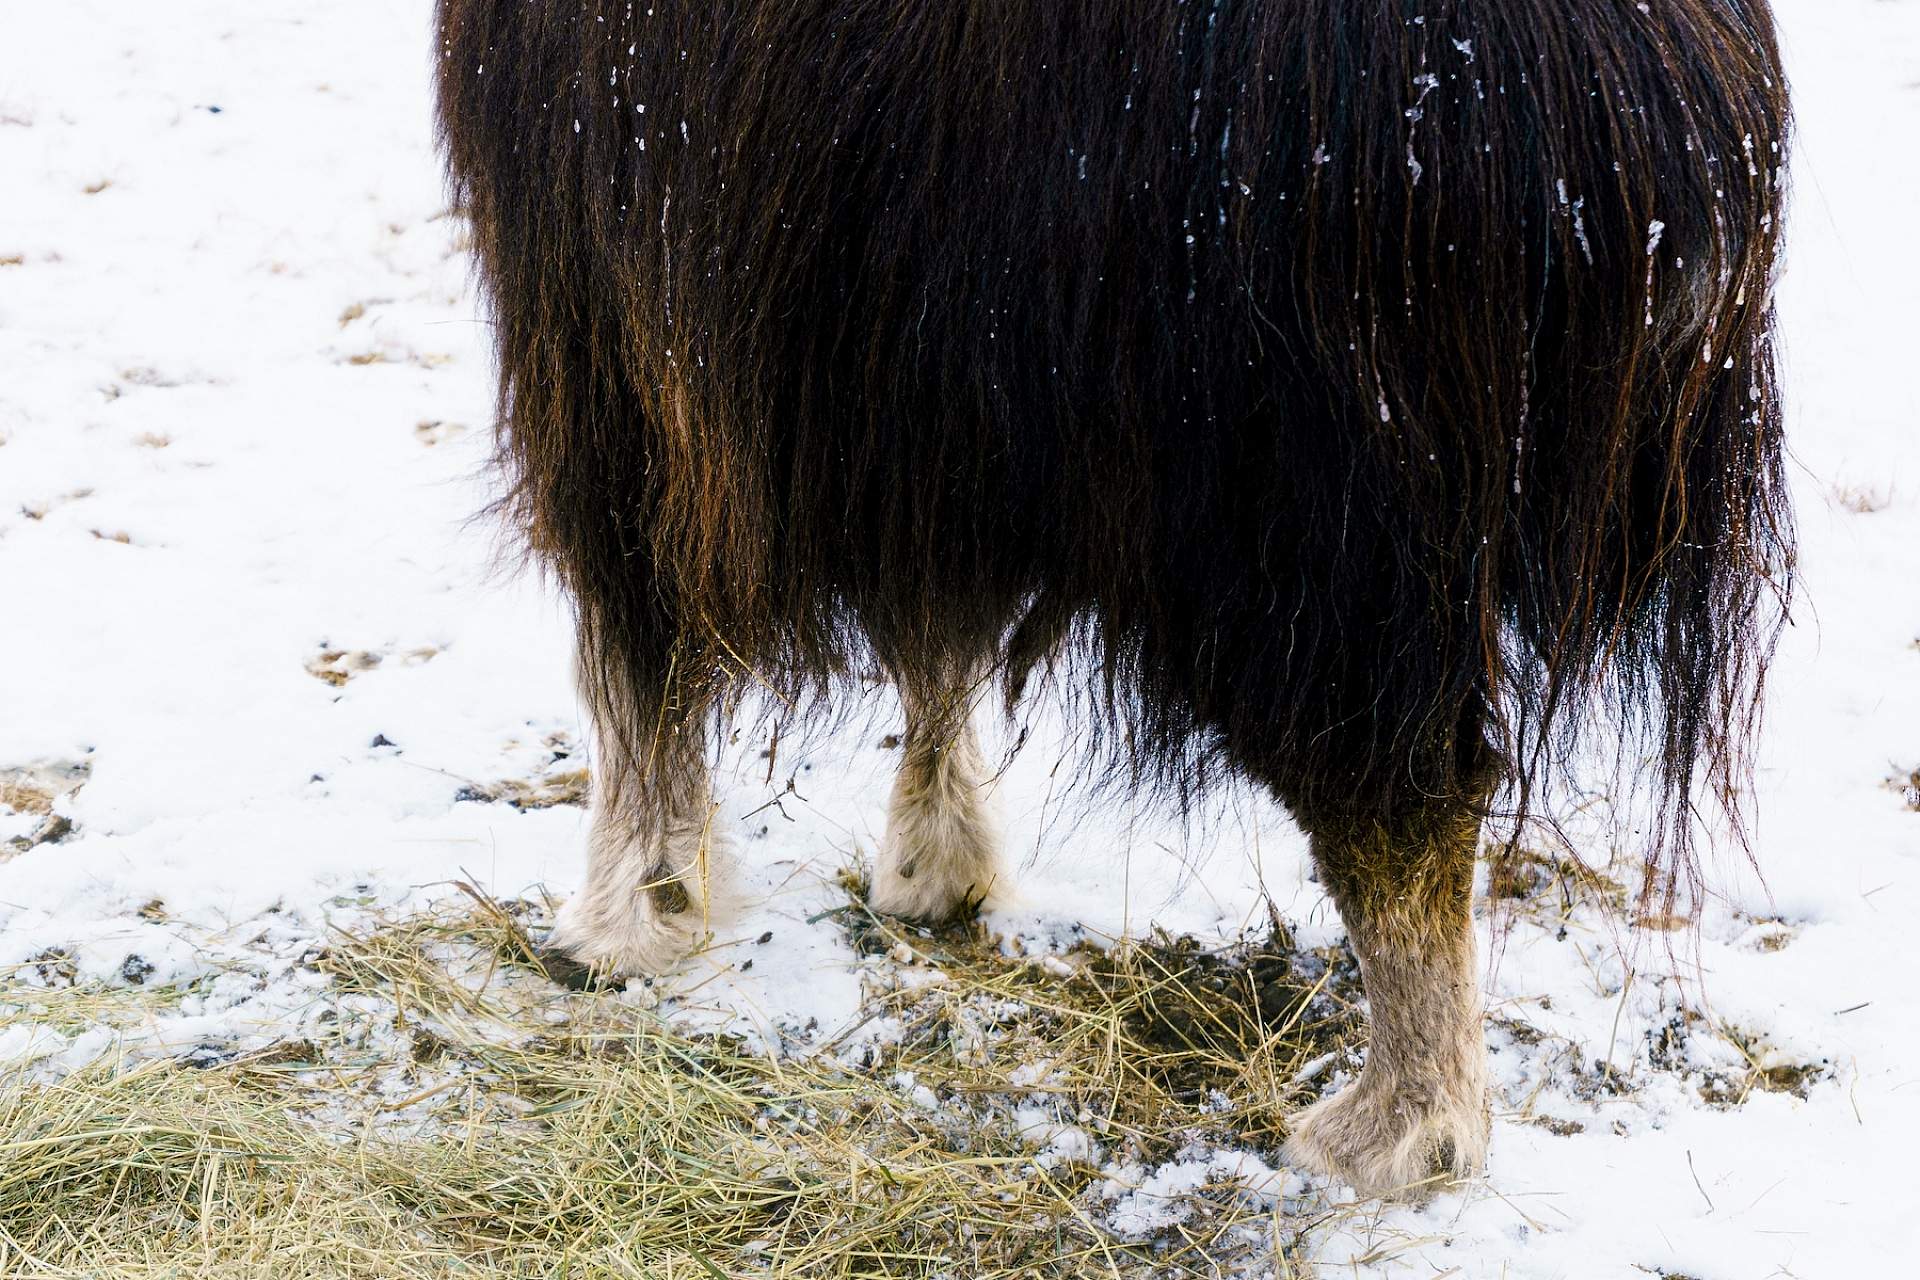 A three legged Musk Ox stands in the snow at the Musk Ox Farm in Palmer, Alaska